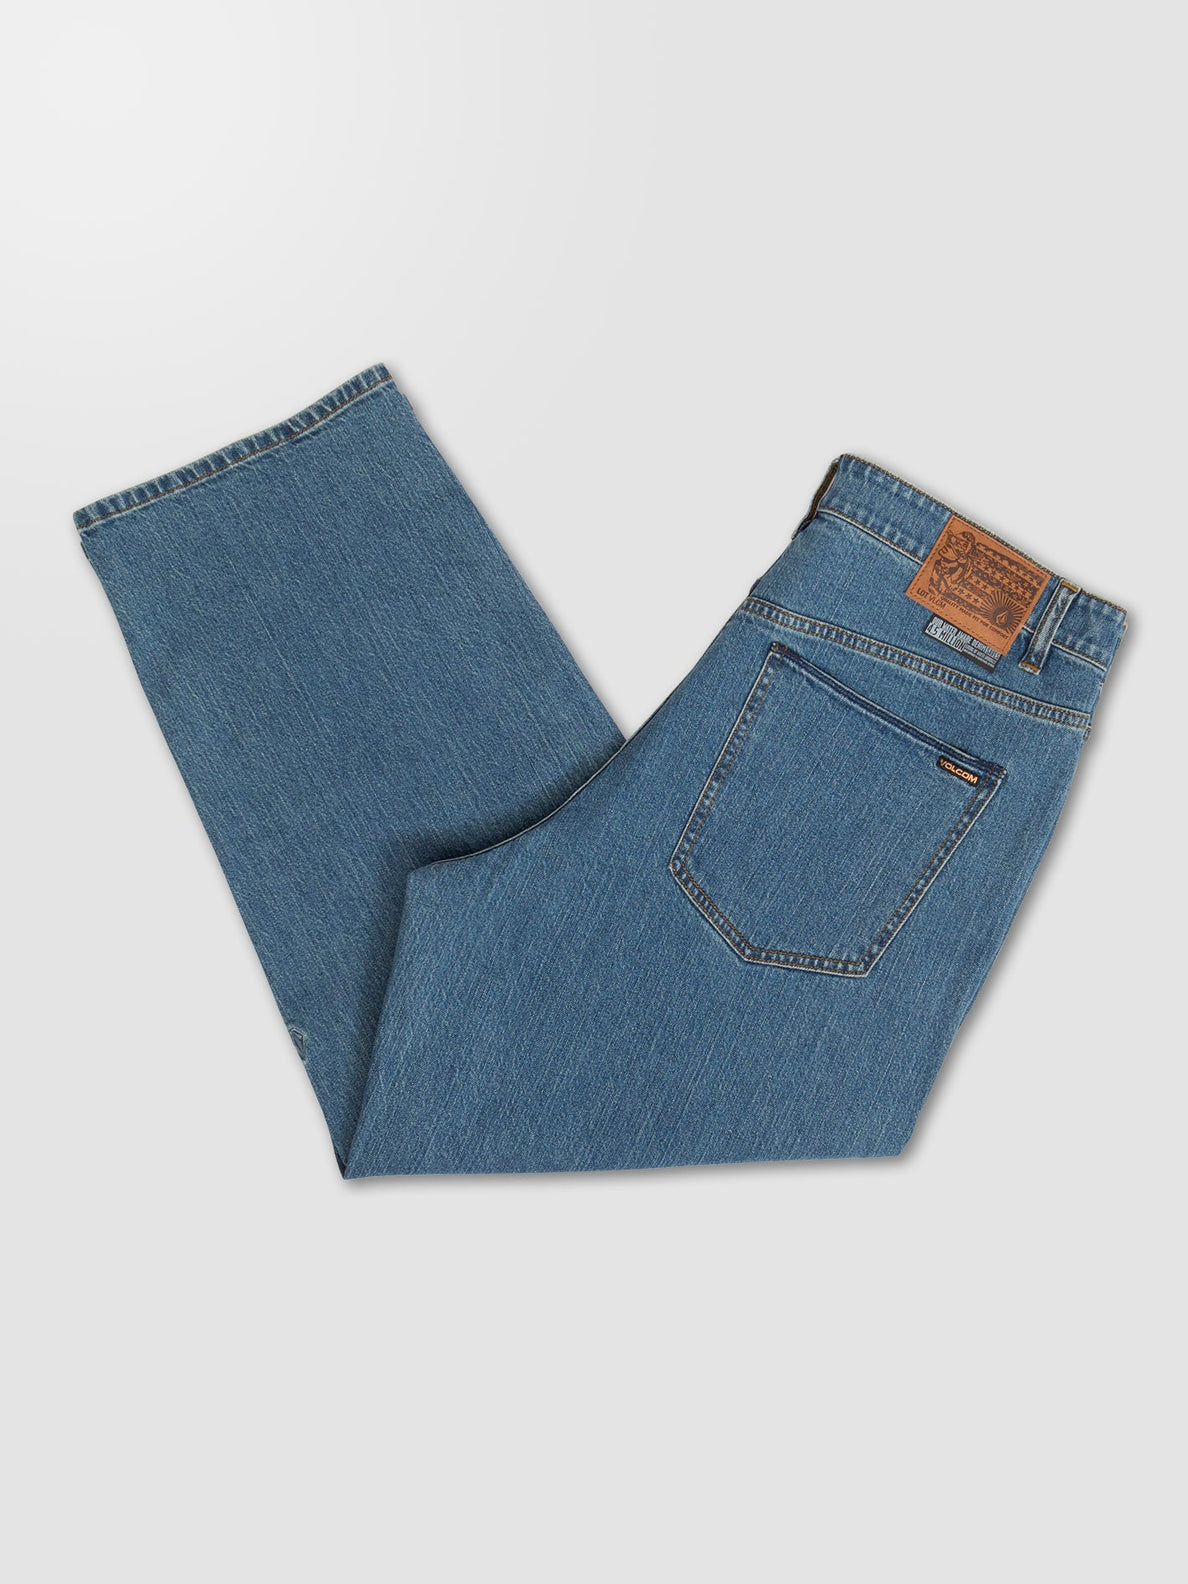 Lurking About Jeans - AGED INDIGO (A1942000_AIN) [9]